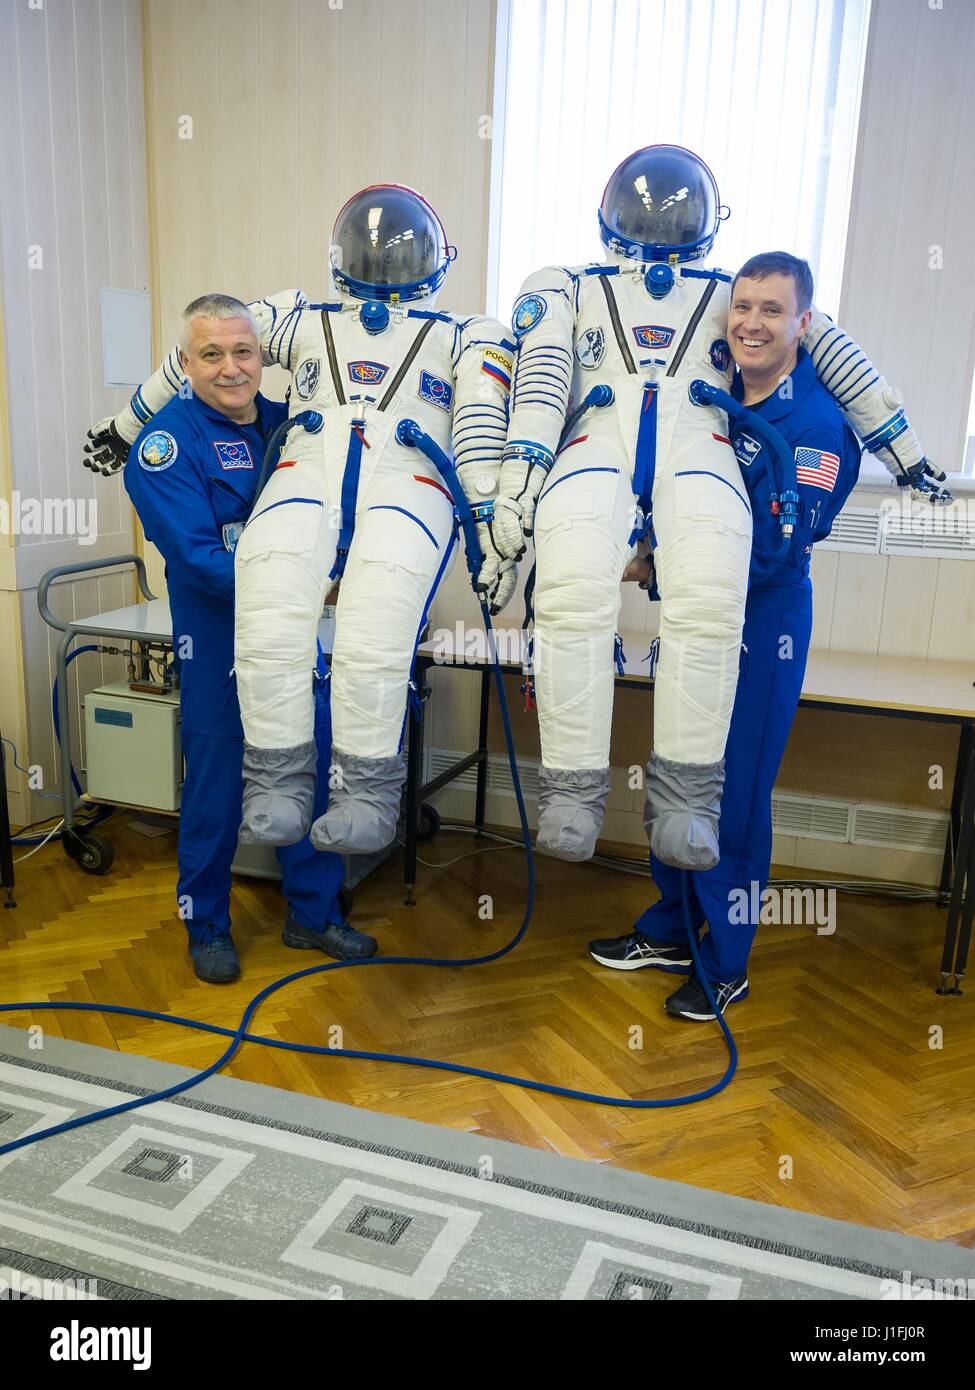 NASA International Space Station Expedition 51 Soyuz MS-04 mission prime crew members Russian cosmonaut Fyodor Yurchikhin of Roscosmos (left) and American astronaut Jack Fischer pose with their Russian Sokol launch and entry spacesuits during pre-launch preparations at the Baikonur Cosmodrome Integration Building April 6, 2017 in Baikonur, Kazakhstan.      (photo by Andrey Shelepin /NASA   via Planetpix) Stock Photo